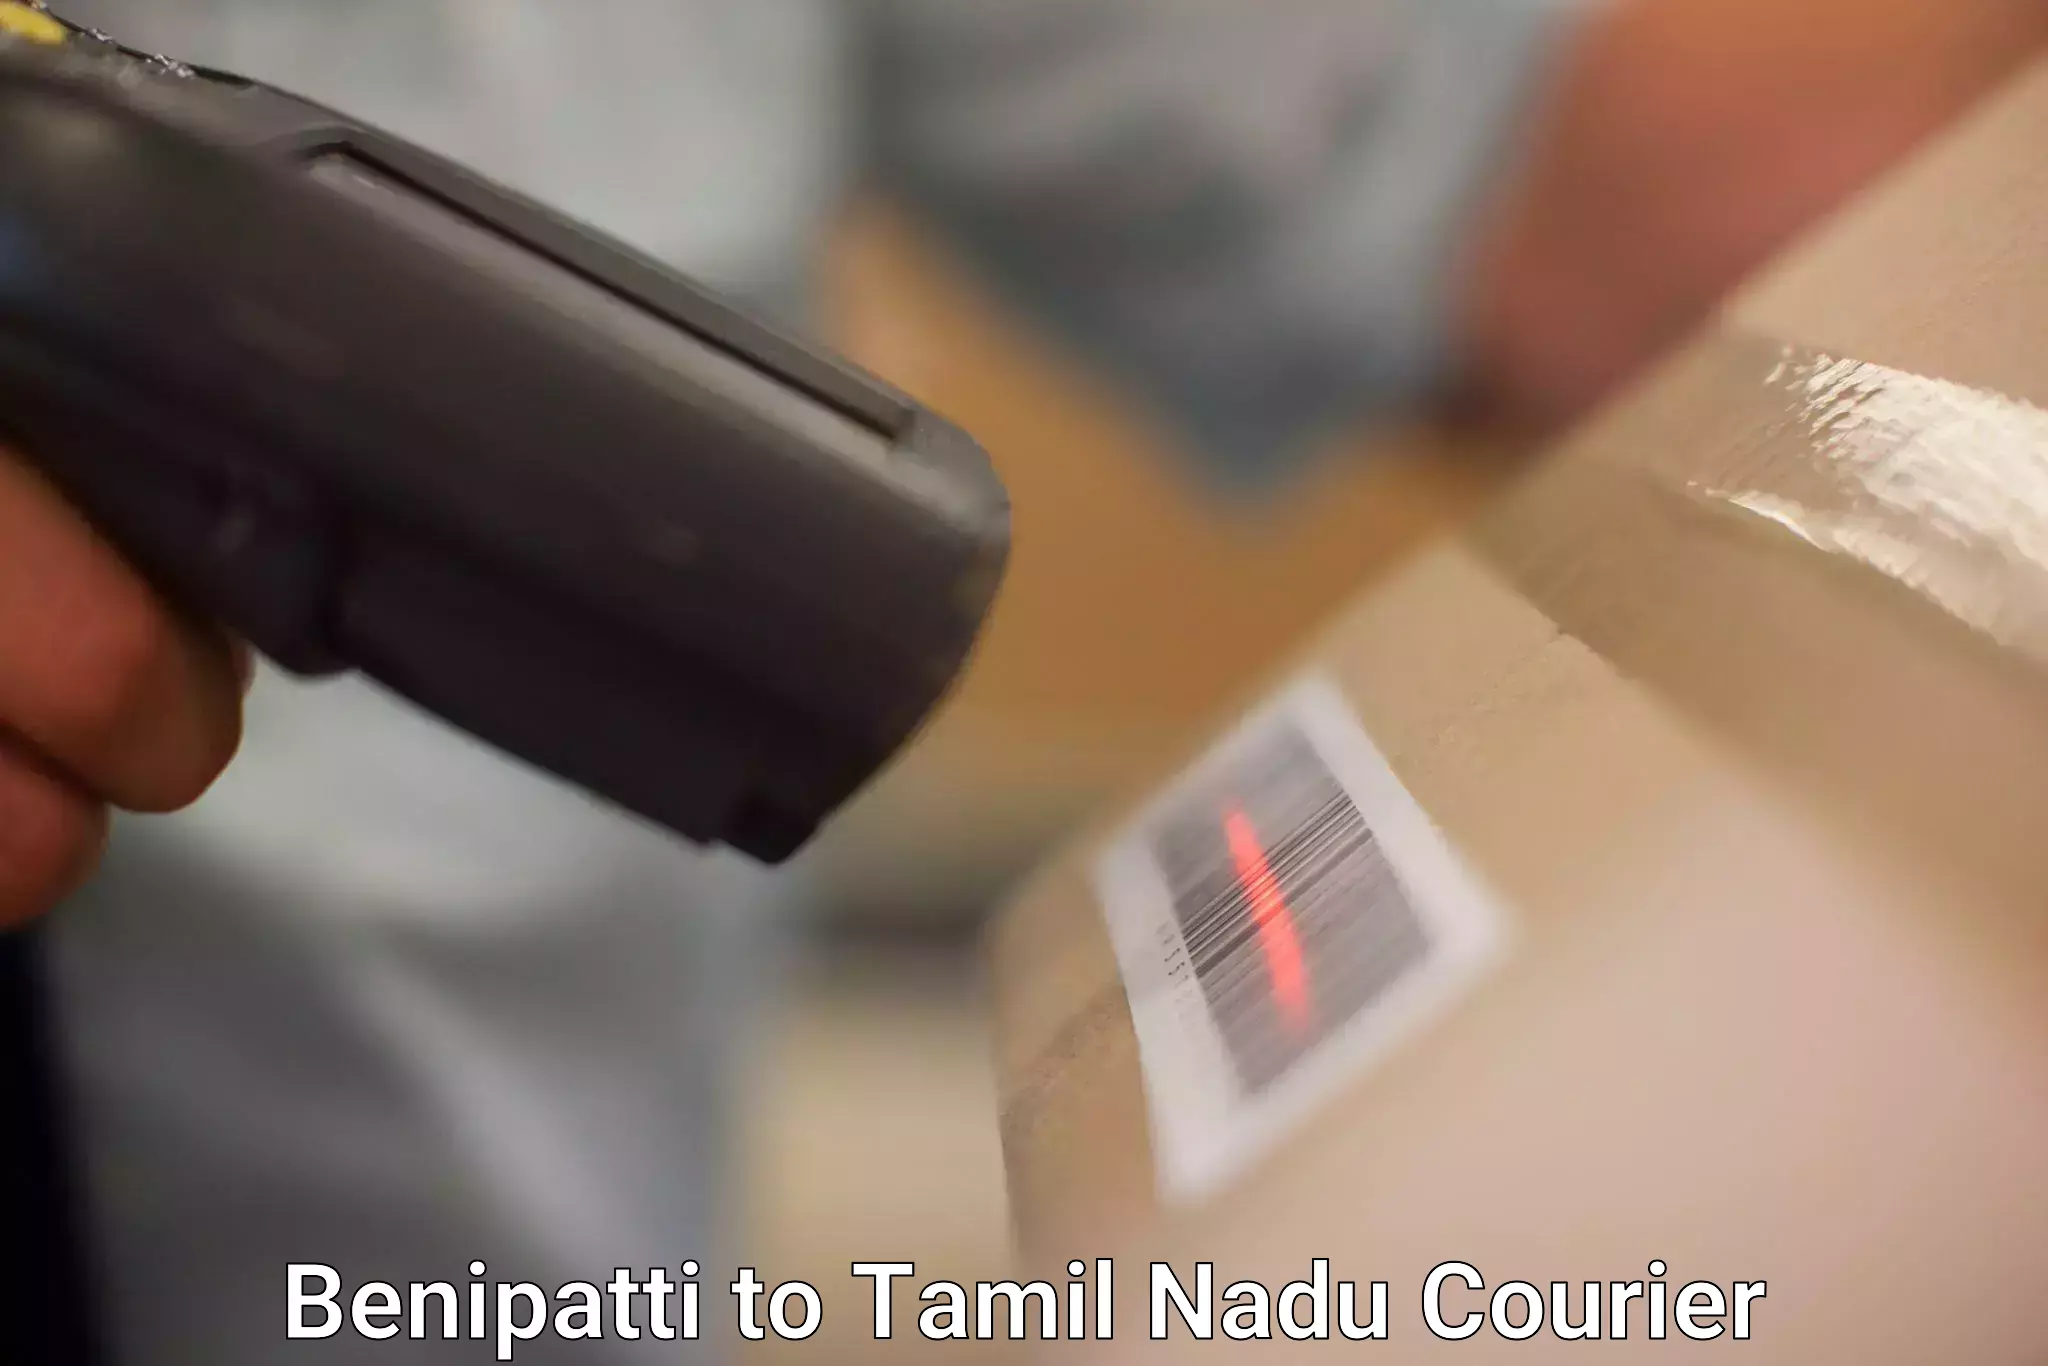 Reliable delivery network Benipatti to Thisayanvilai